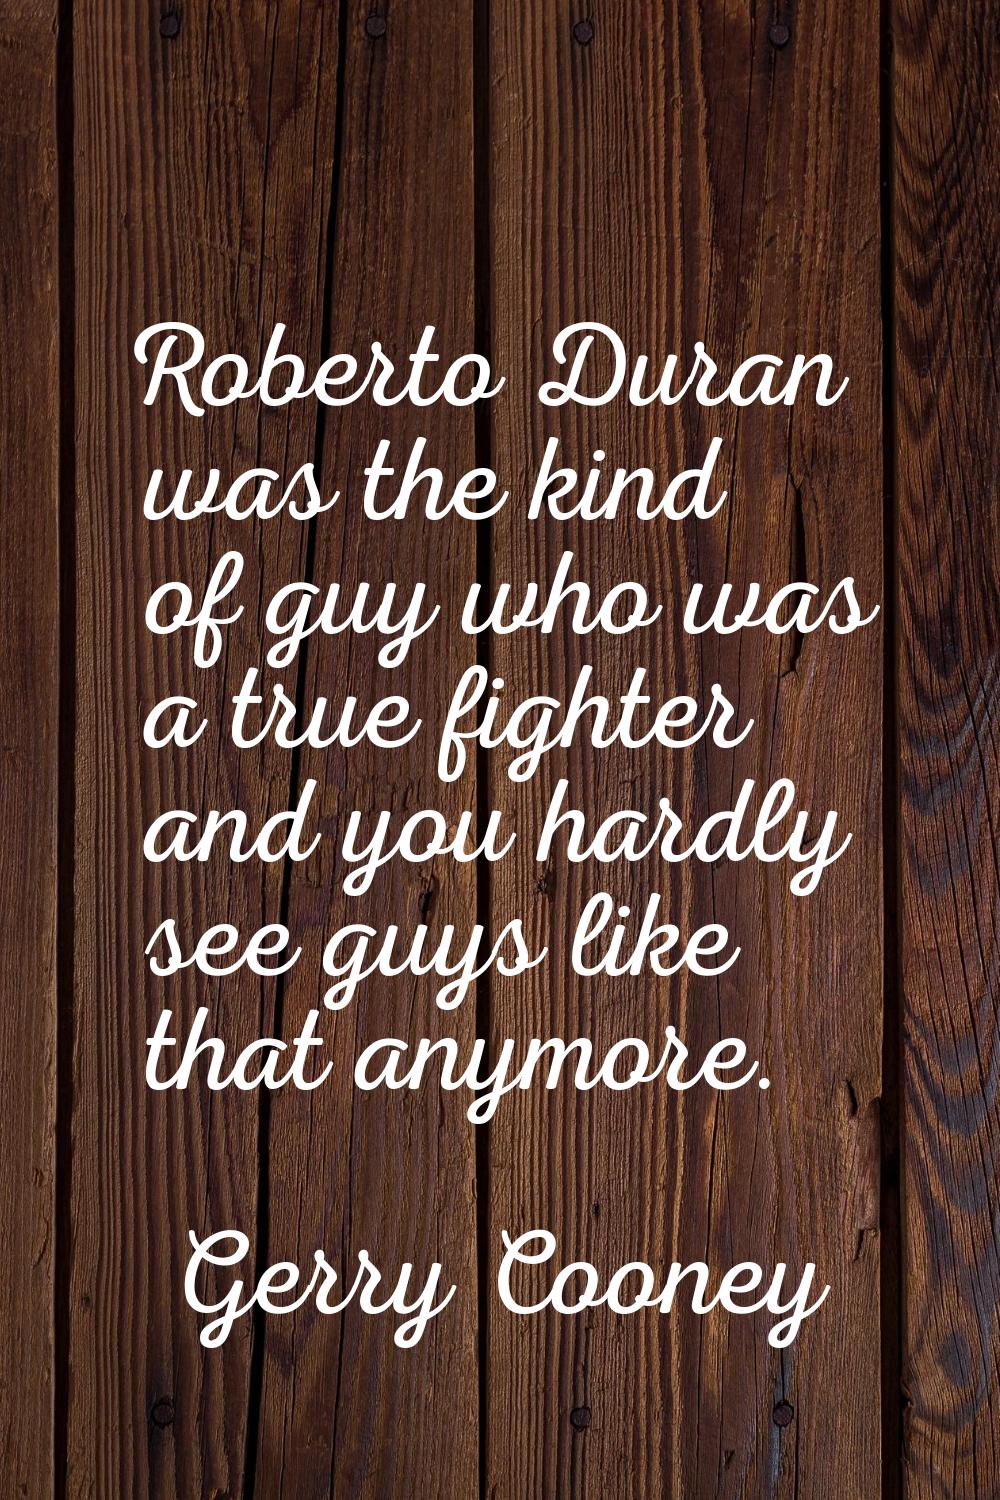 Roberto Duran was the kind of guy who was a true fighter and you hardly see guys like that anymore.